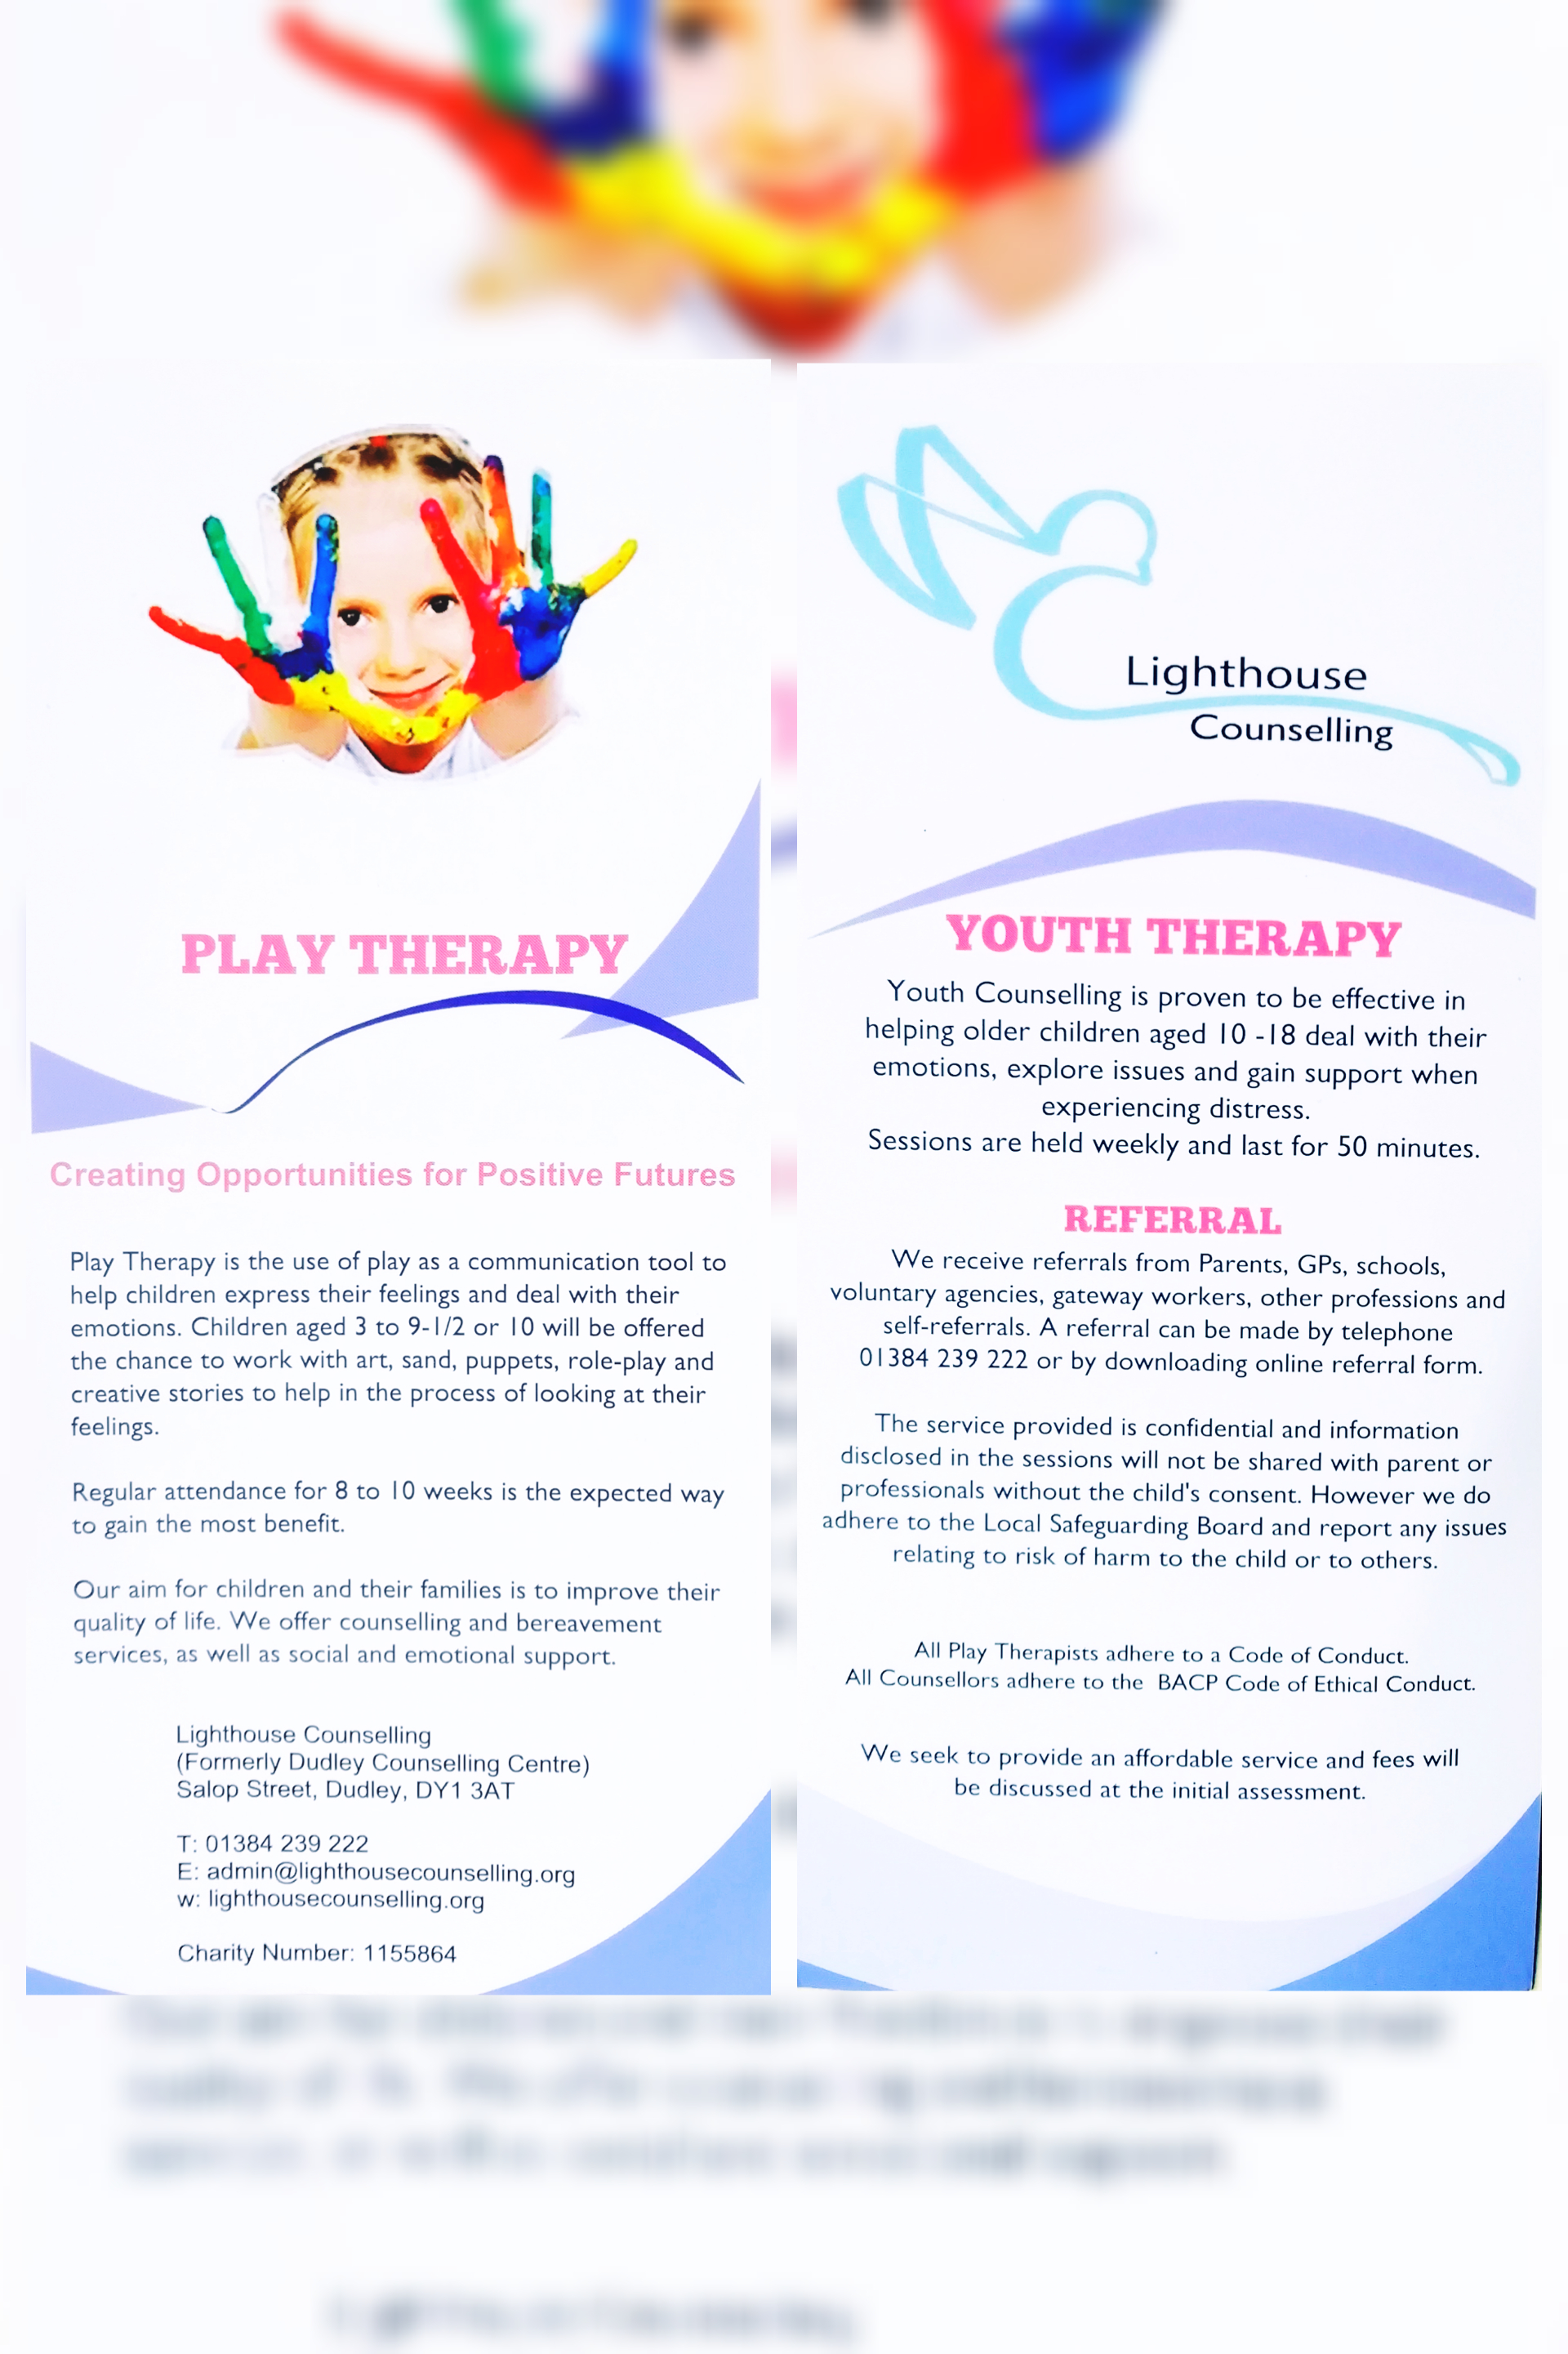 play_therapy_youth_counselling